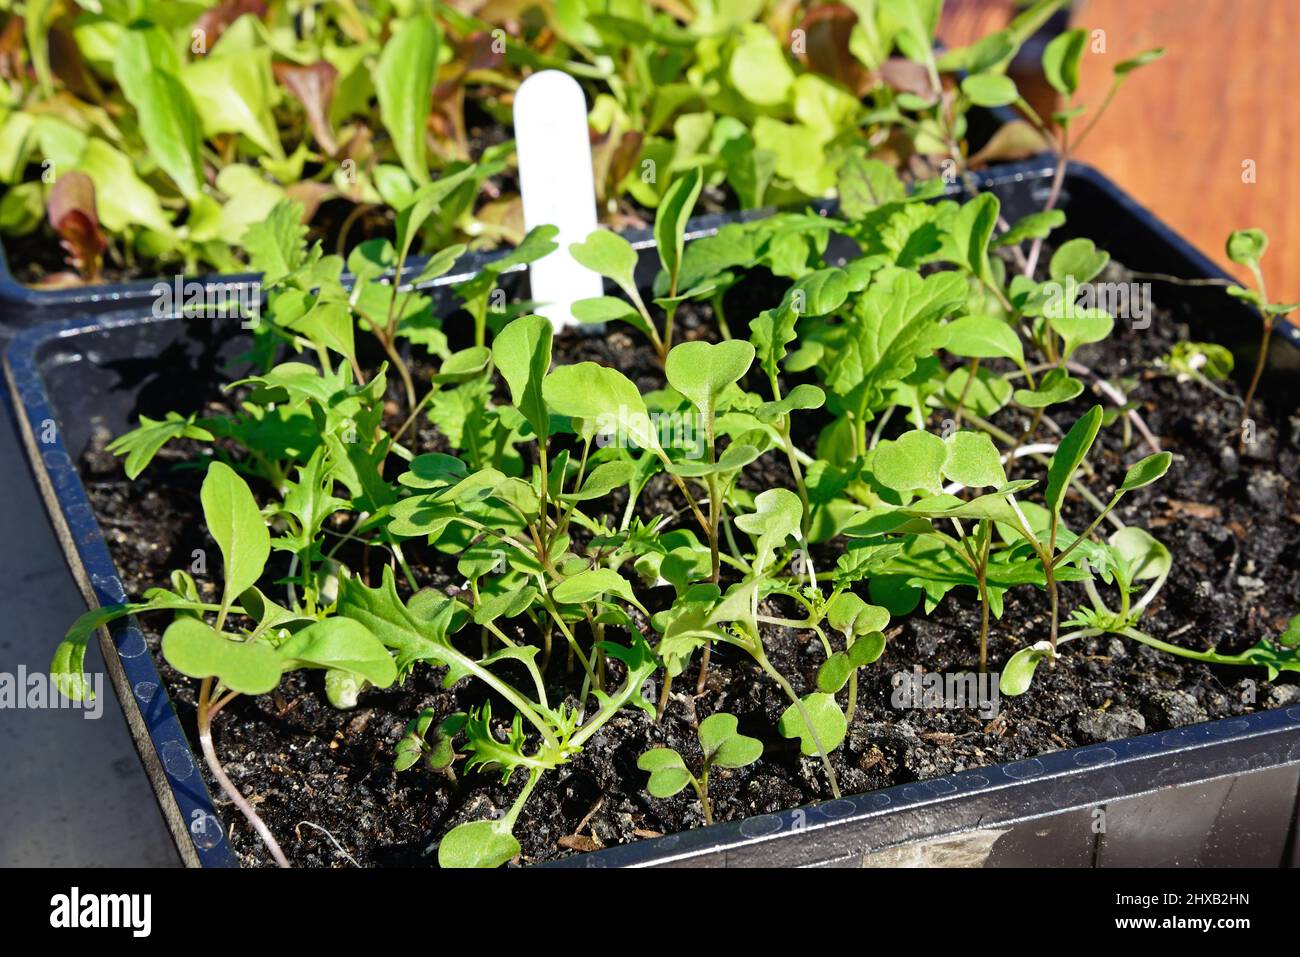 Spicy mix of lettuce seedlings in a seed tray, Staffordshire, England, UK, Europe. Stock Photo